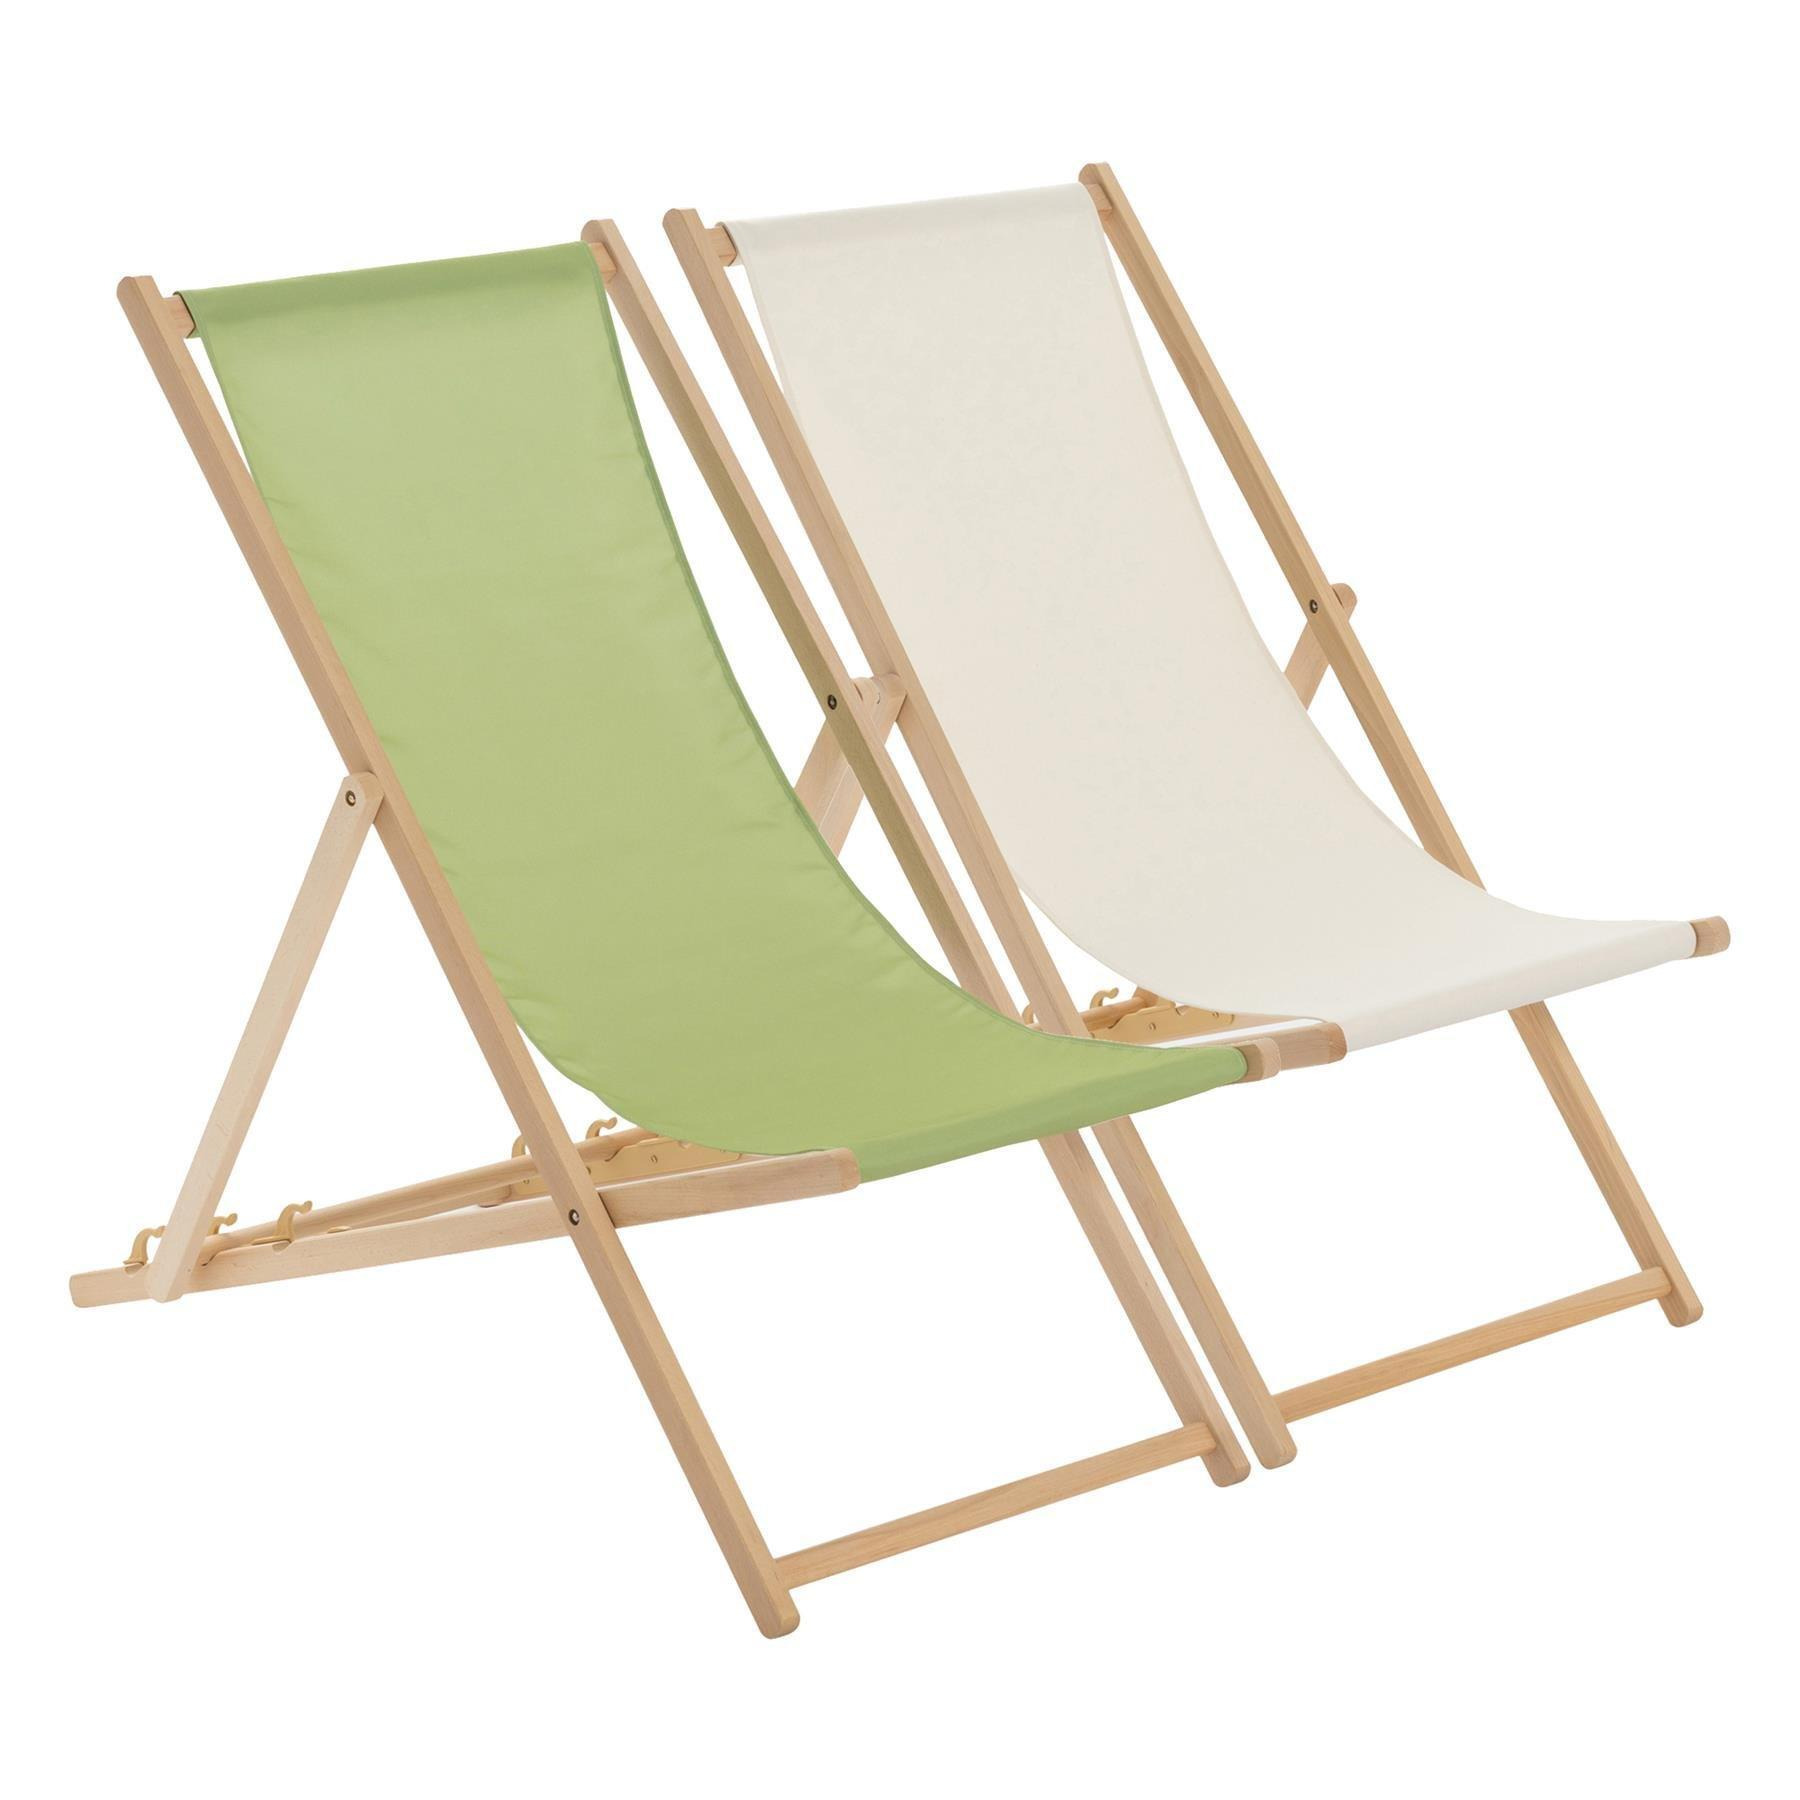 Folding Wooden Deck Chairs Lime Green/Natural Pack of 2 - image 1